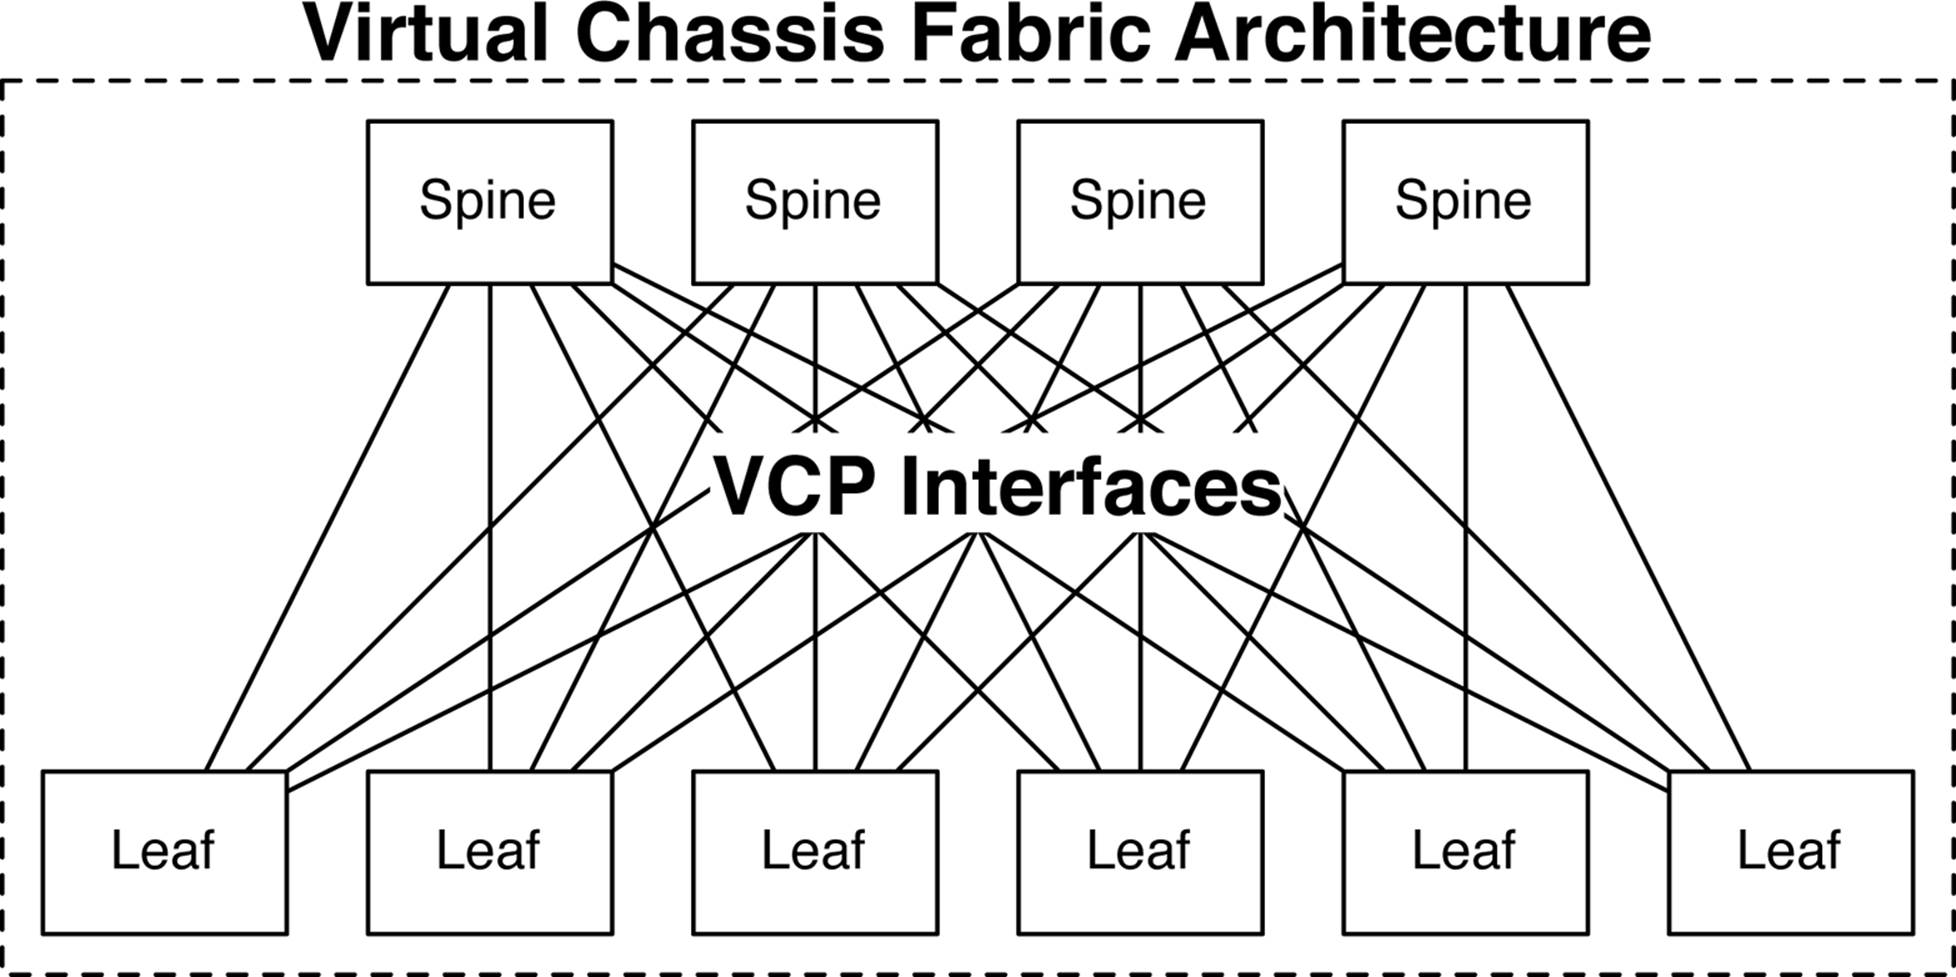 VCP interfaces in VCF